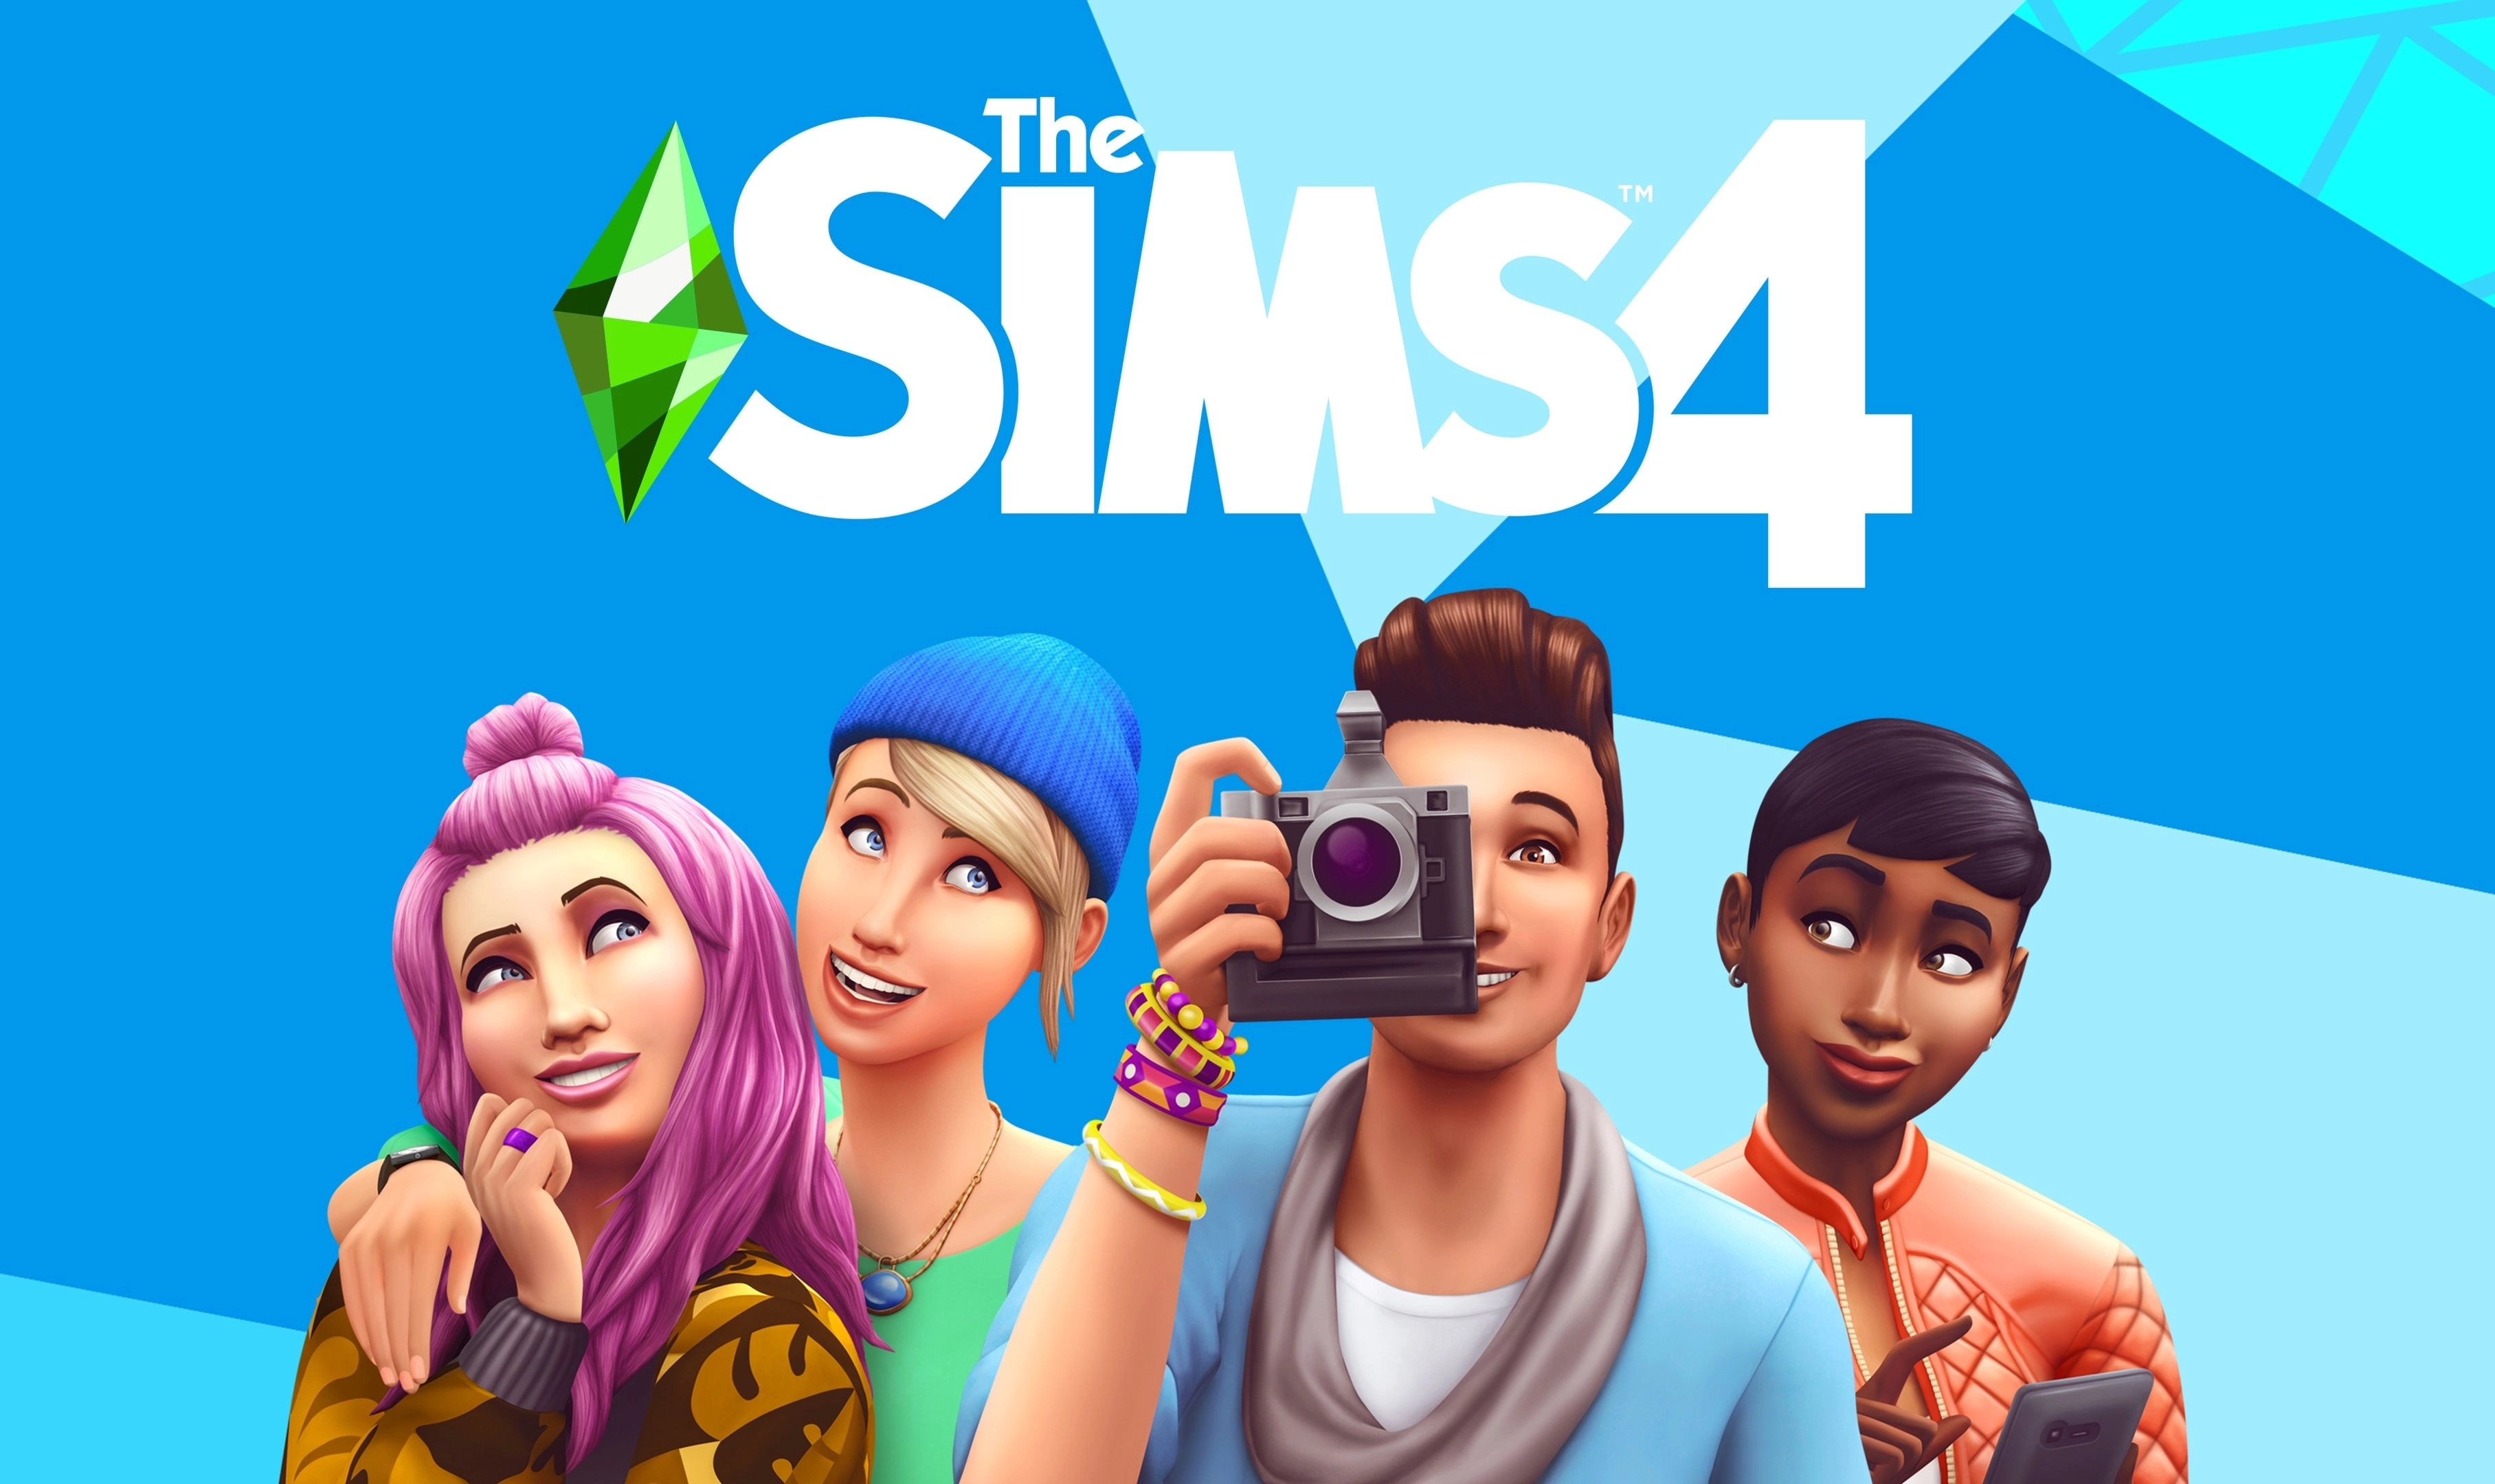 Electronic Arts claims that The Sims 4 now has over 70 million players 